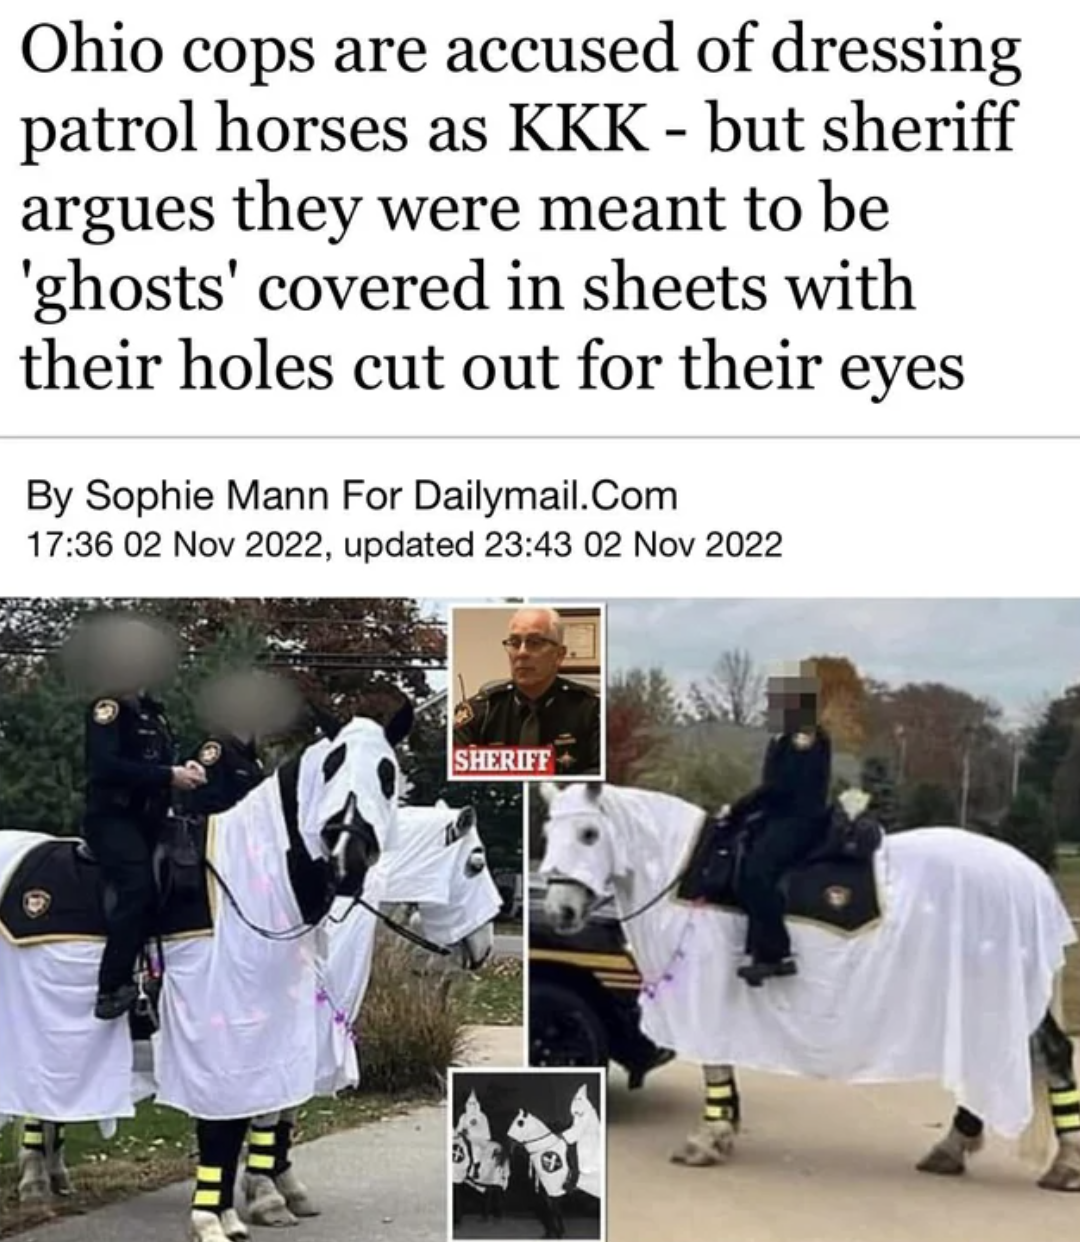 Freaky Fails and Facepalms - photo caption - Ohio cops are accused of dressing patrol horses as Kkk but sheriff argues they were meant to be 'ghosts' covered in sheets with their holes cut out for their eyes By Sophie Mann For